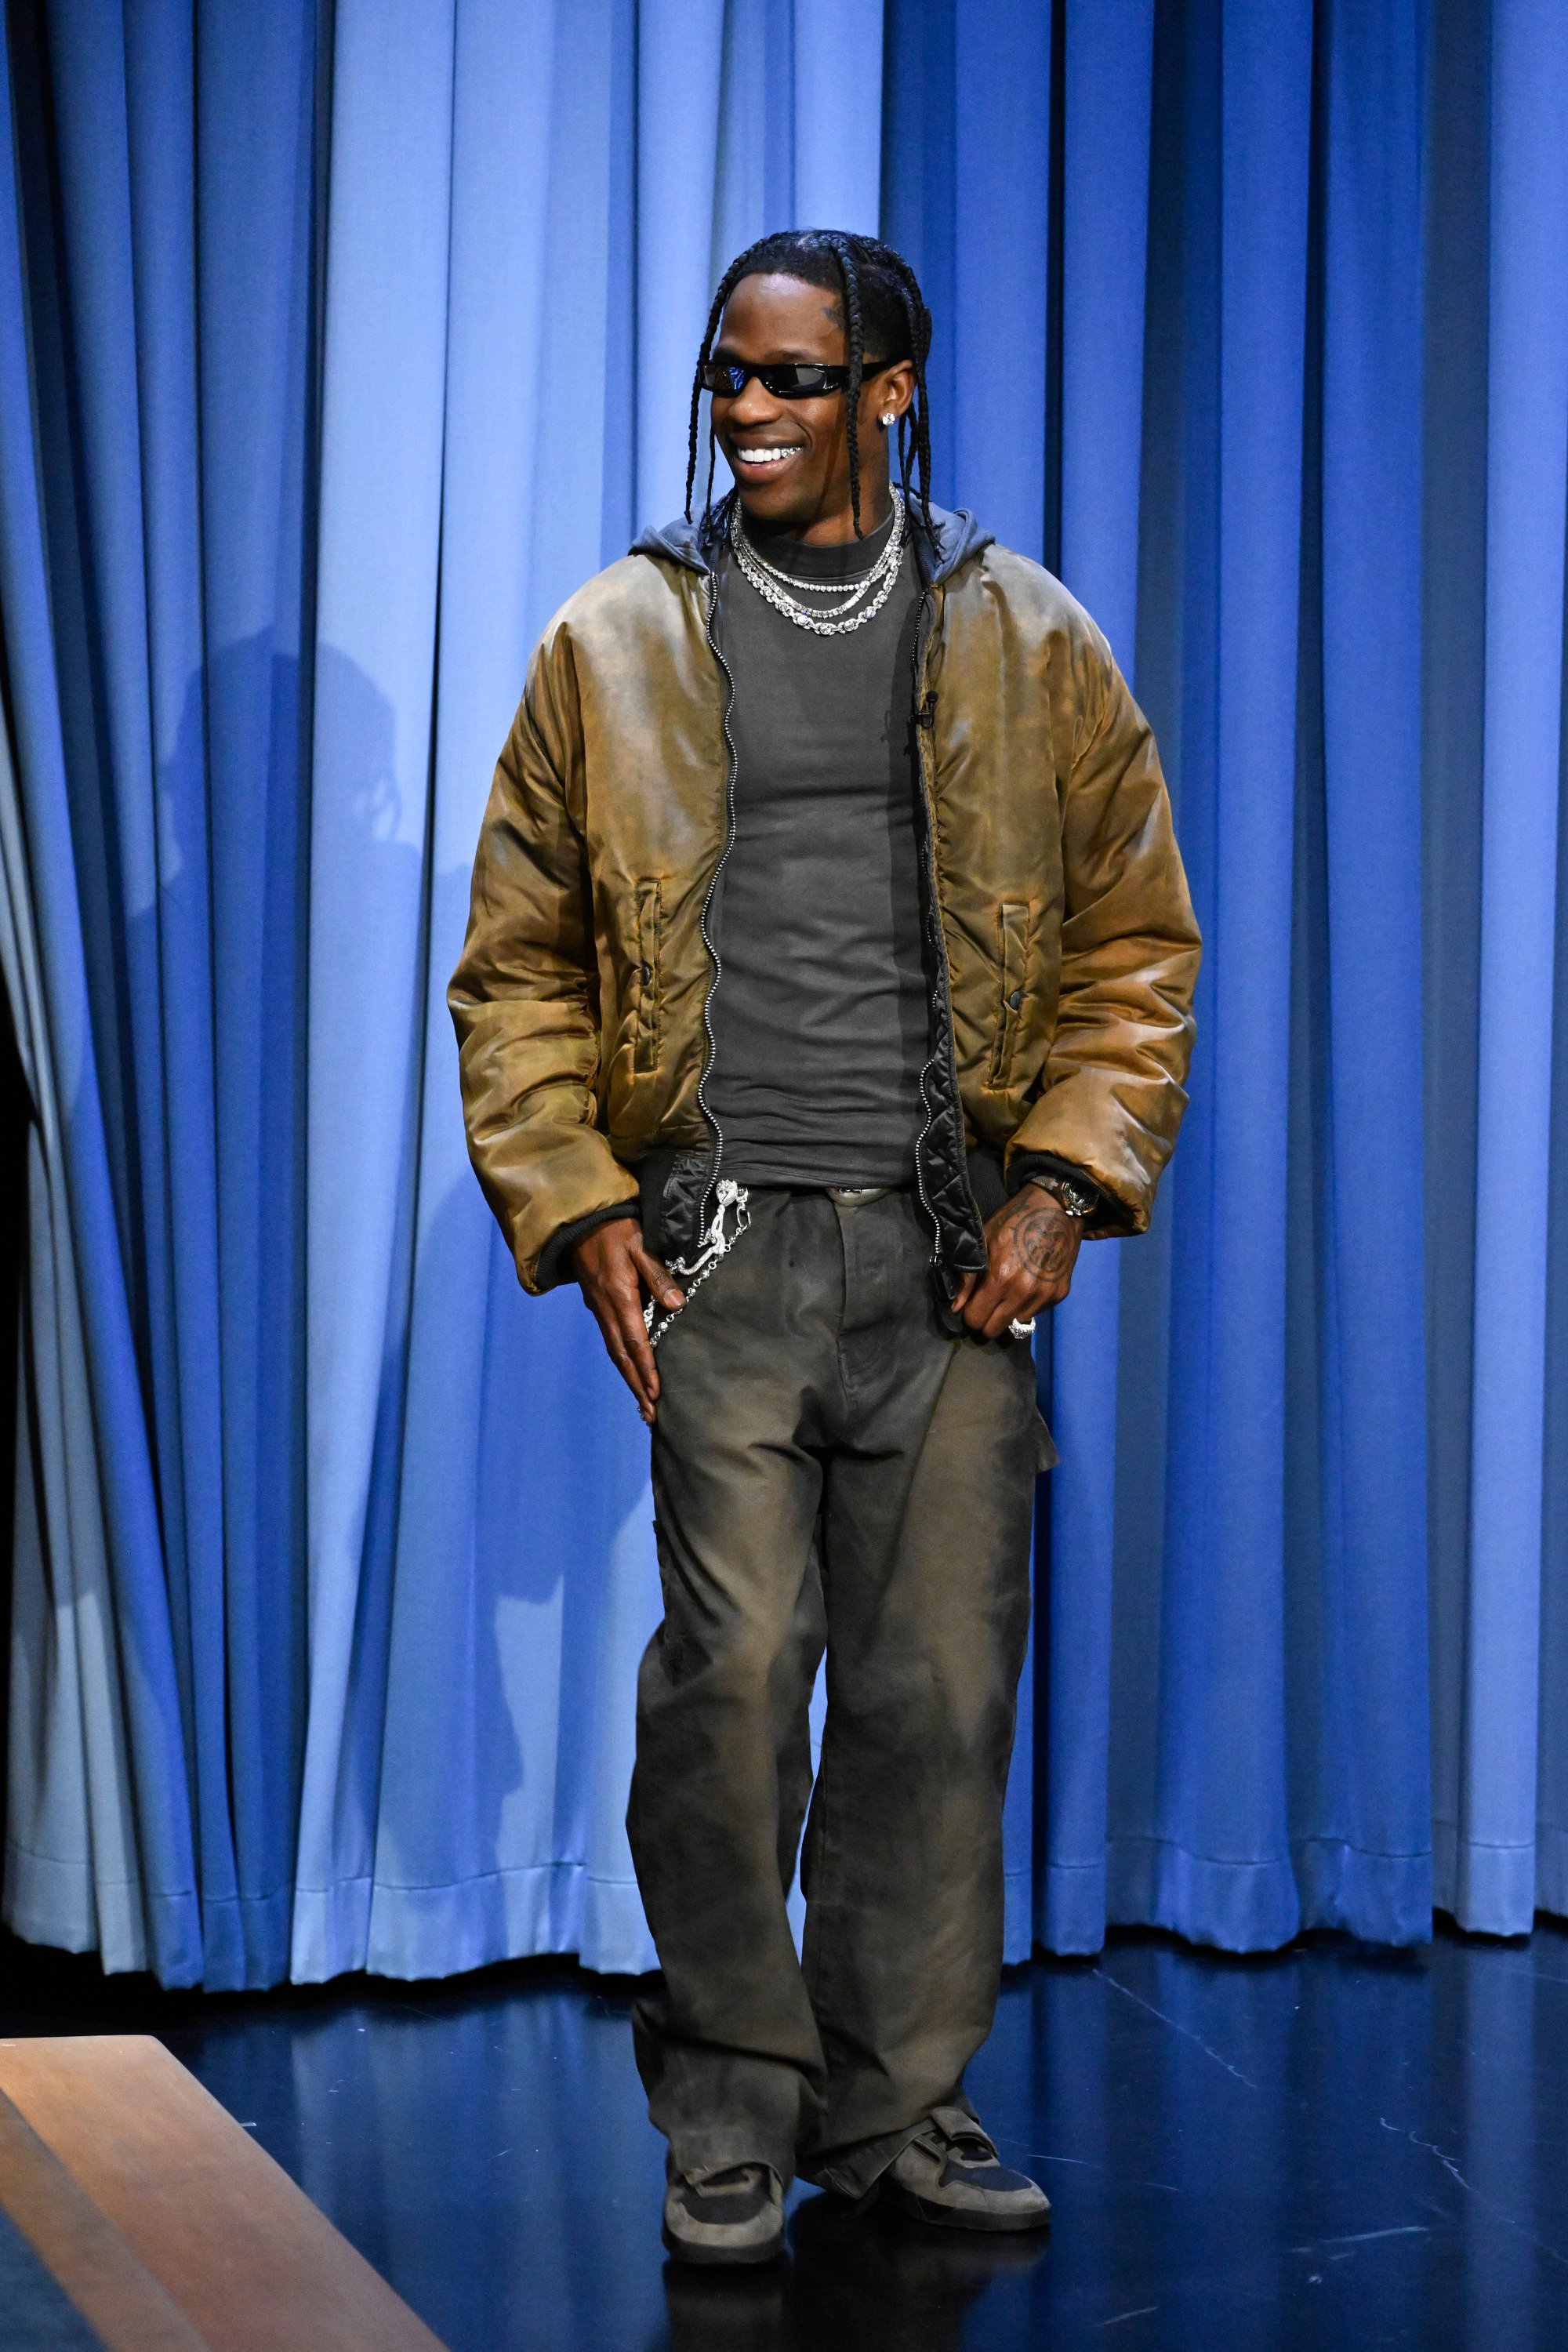 Rapper Travis Scott appeared on The Tonight Show Starring Jimmy Fallon in December in trademark relaxed style with a distressed bomber jacket topped with necklace bling. Photo: Getty Images